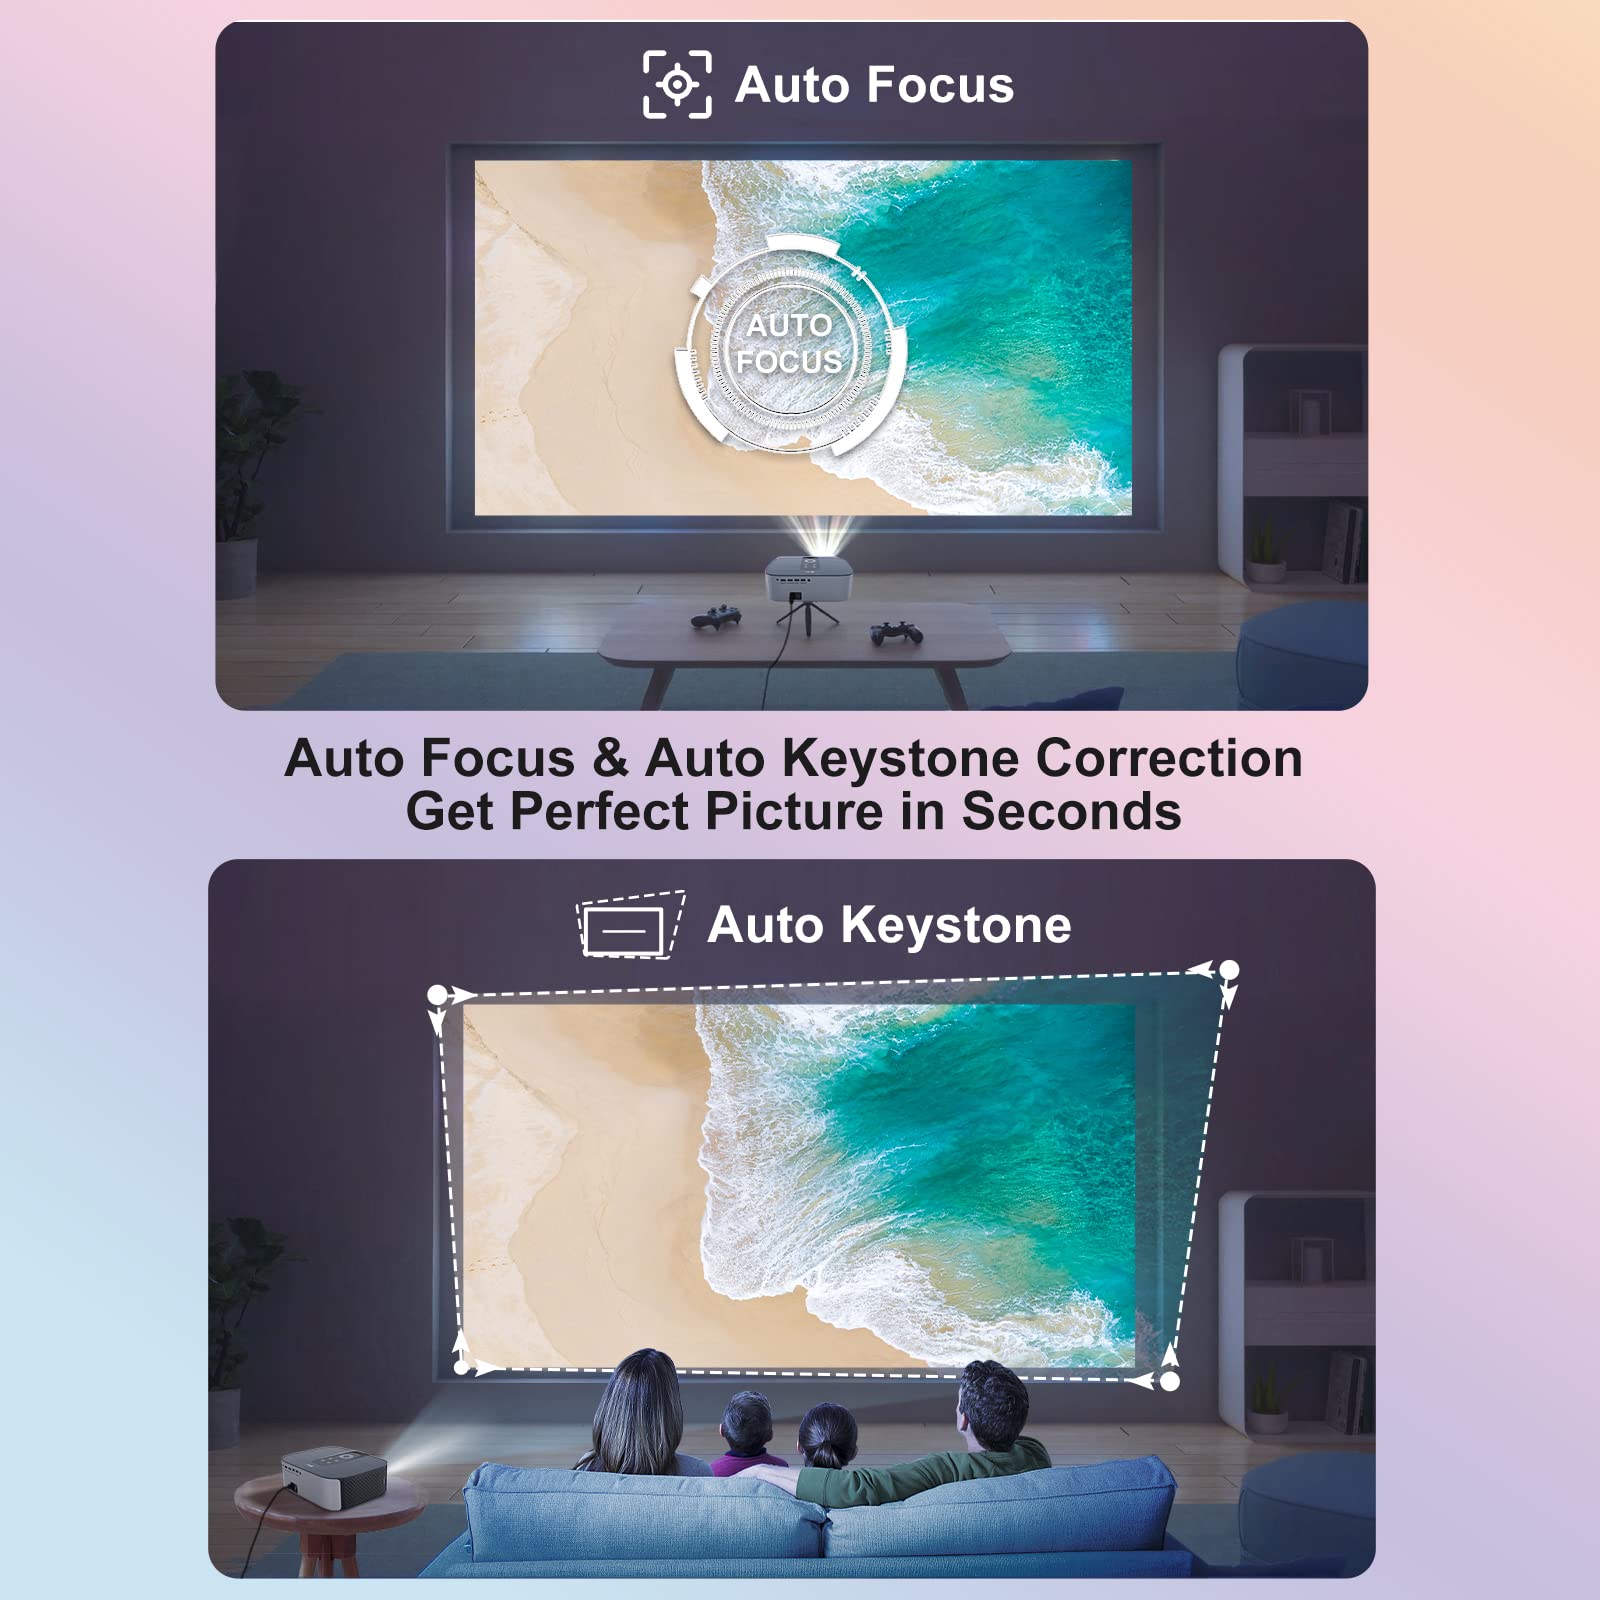 Smart Projector Integrate with Android TV 10, Artlii Play4 AutoFocus 5G WiFi Bluetooth Projector 4k Supported, Auto Keystone, FHD 1080P Outdoor Movie Projector Compatible W/iOS, Android